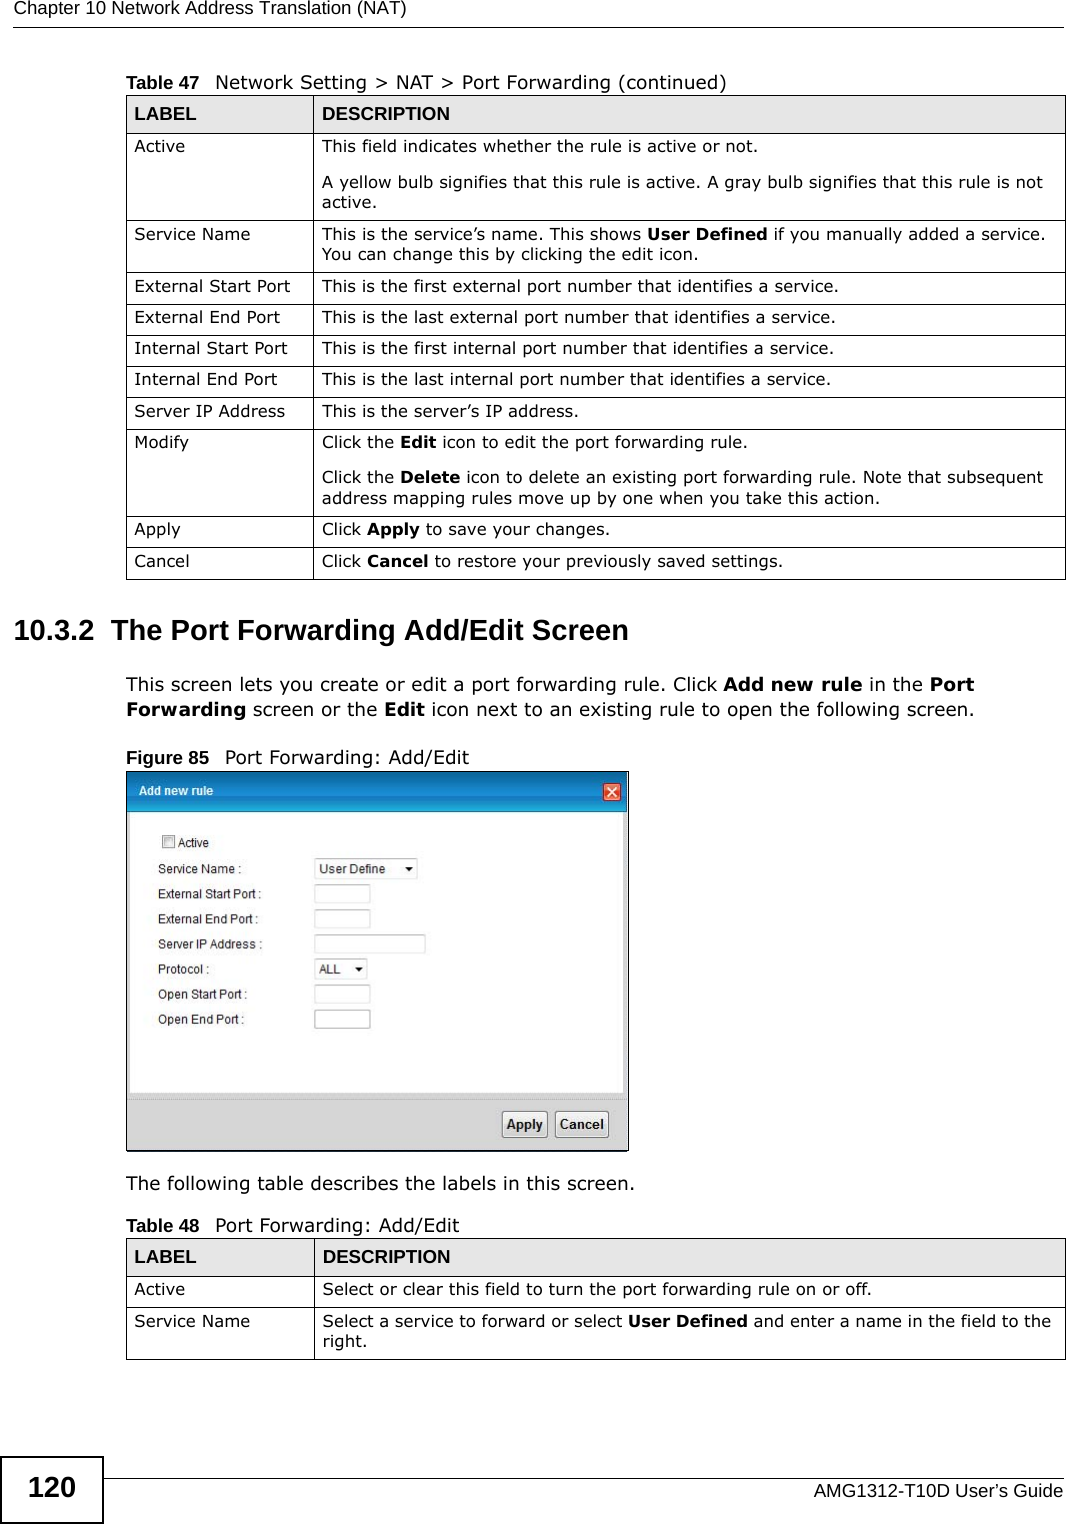 Chapter 10 Network Address Translation (NAT)AMG1312-T10D User’s Guide12010.3.2  The Port Forwarding Add/Edit ScreenThis screen lets you create or edit a port forwarding rule. Click Add new rule in the Port Forwarding screen or the Edit icon next to an existing rule to open the following screen.Figure 85   Port Forwarding: Add/Edit The following table describes the labels in this screen. Active This field indicates whether the rule is active or not.A yellow bulb signifies that this rule is active. A gray bulb signifies that this rule is not active.Service Name This is the service’s name. This shows User Defined if you manually added a service. You can change this by clicking the edit icon.External Start Port  This is the first external port number that identifies a service.External End Port  This is the last external port number that identifies a service.Internal Start Port This is the first internal port number that identifies a service.Internal End Port This is the last internal port number that identifies a service.Server IP Address This is the server’s IP address.Modify Click the Edit icon to edit the port forwarding rule.Click the Delete icon to delete an existing port forwarding rule. Note that subsequent address mapping rules move up by one when you take this action.Apply Click Apply to save your changes.Cancel Click Cancel to restore your previously saved settings.Table 47   Network Setting &gt; NAT &gt; Port Forwarding (continued)LABEL DESCRIPTIONTable 48   Port Forwarding: Add/EditLABEL DESCRIPTIONActive Select or clear this field to turn the port forwarding rule on or off.Service Name Select a service to forward or select User Defined and enter a name in the field to the right. 